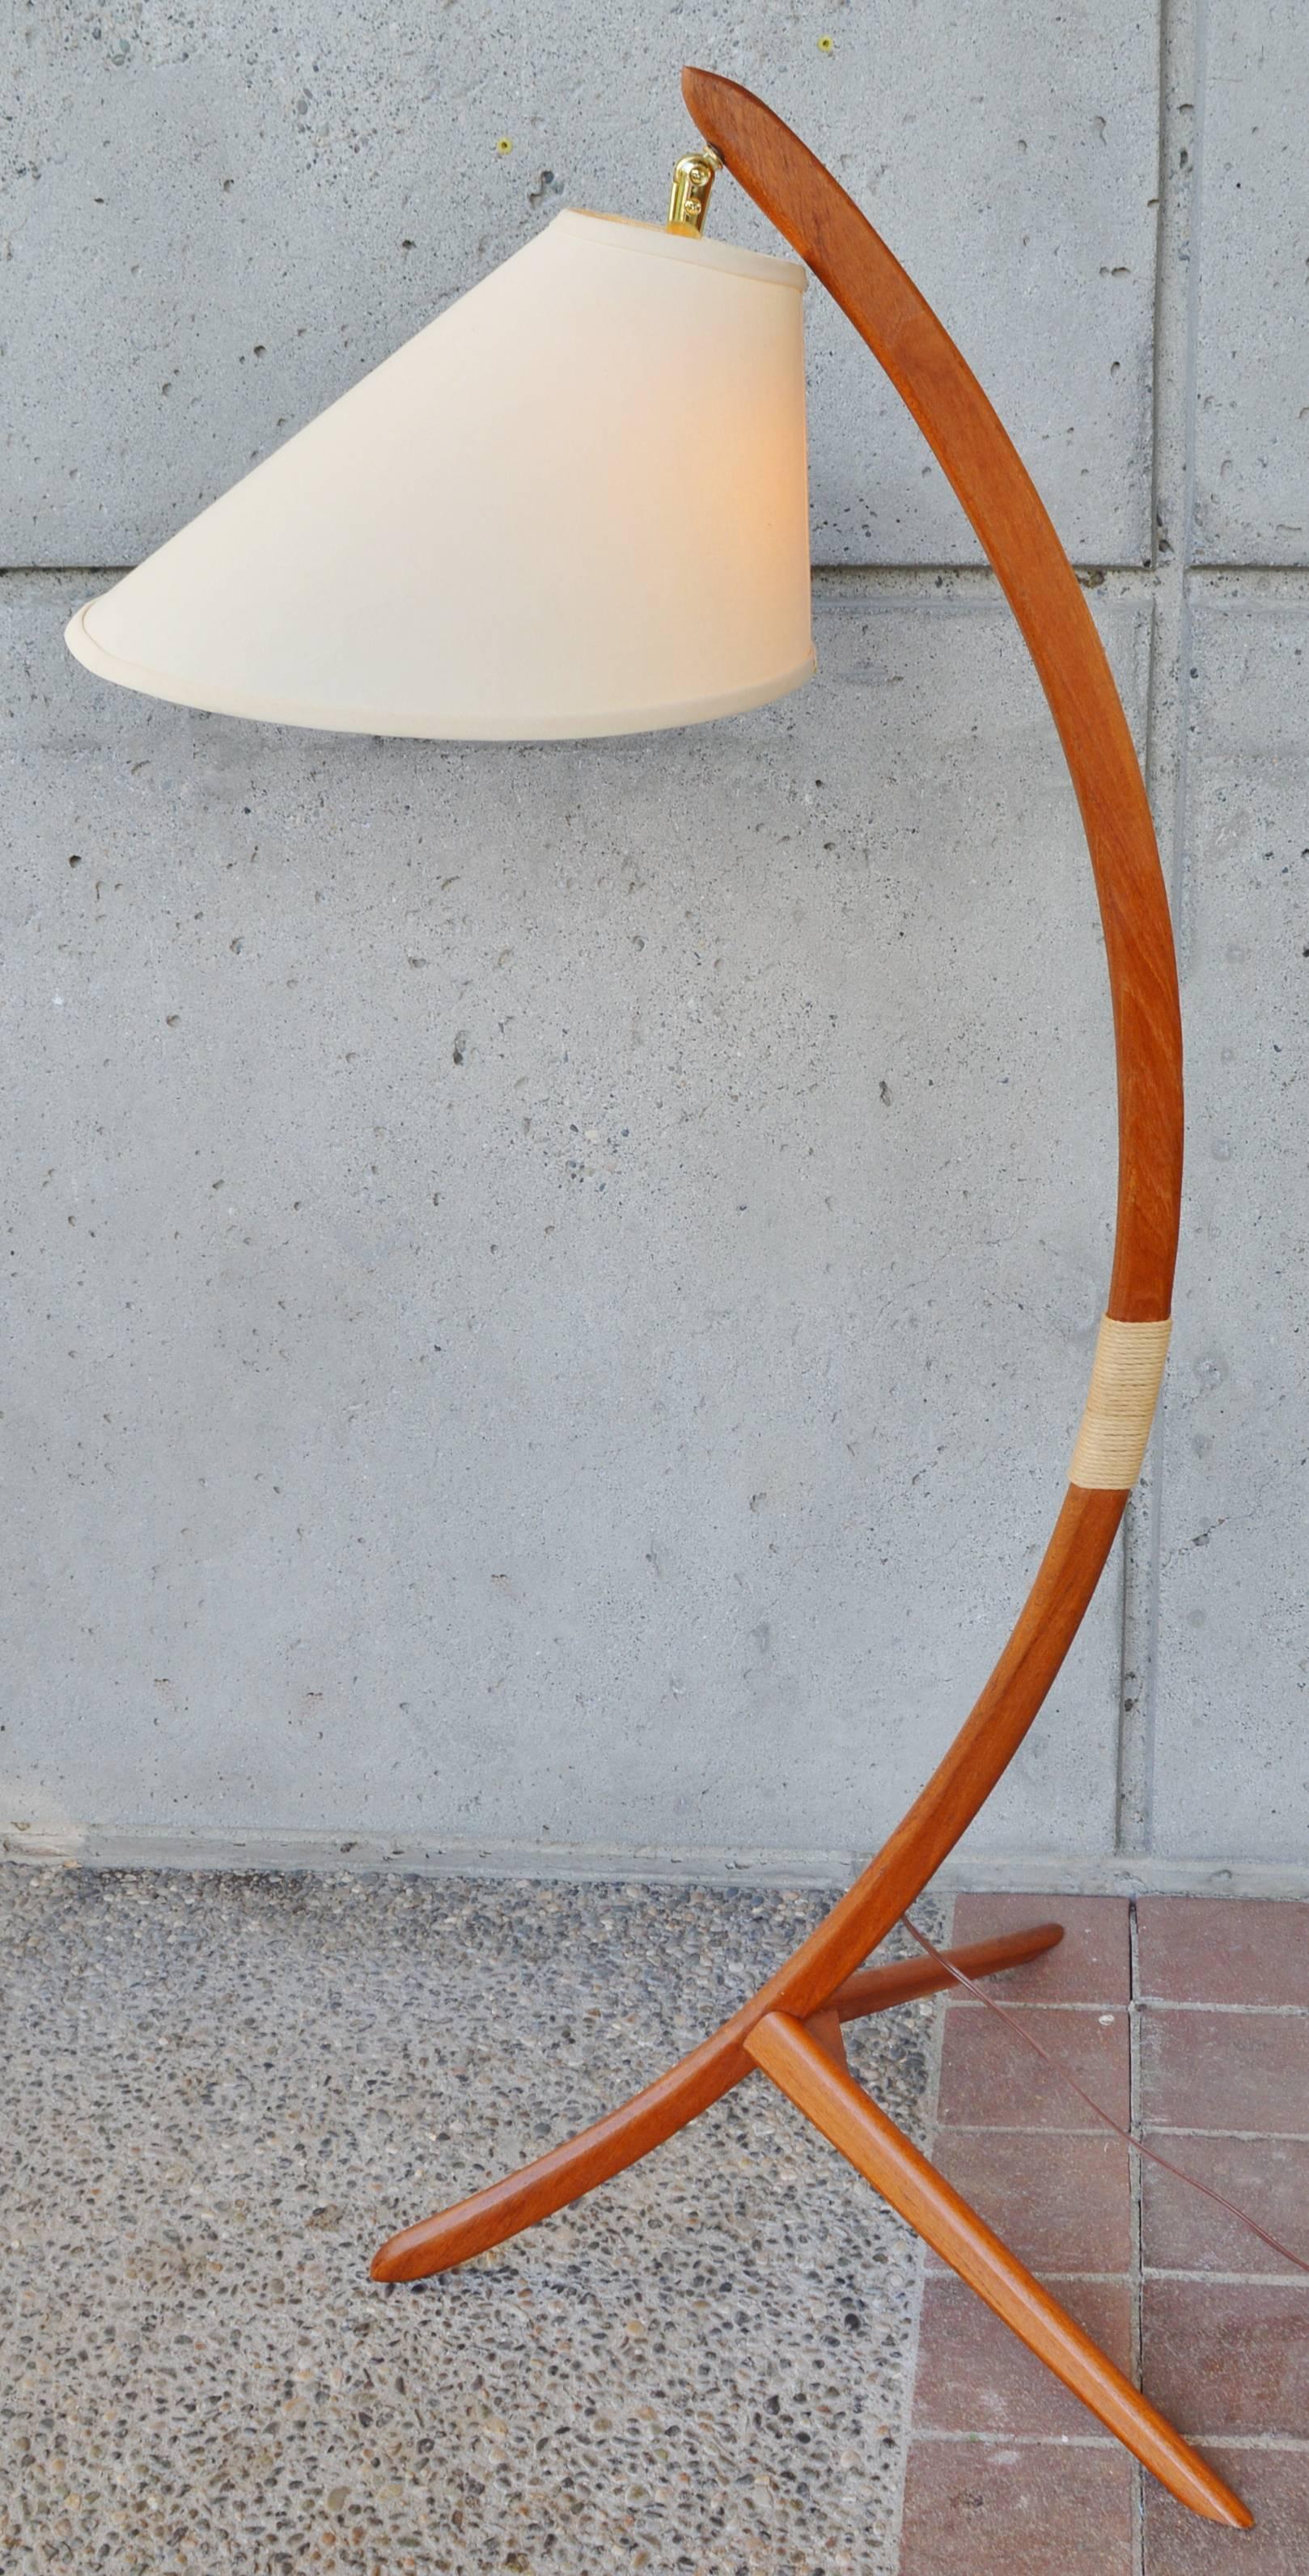 This iconic Danish Modern teak floor lamp in the style of Rispal is so dramatic and a real scene stealer! In awesome condition and freshly oiled, the lamp is nick named the 